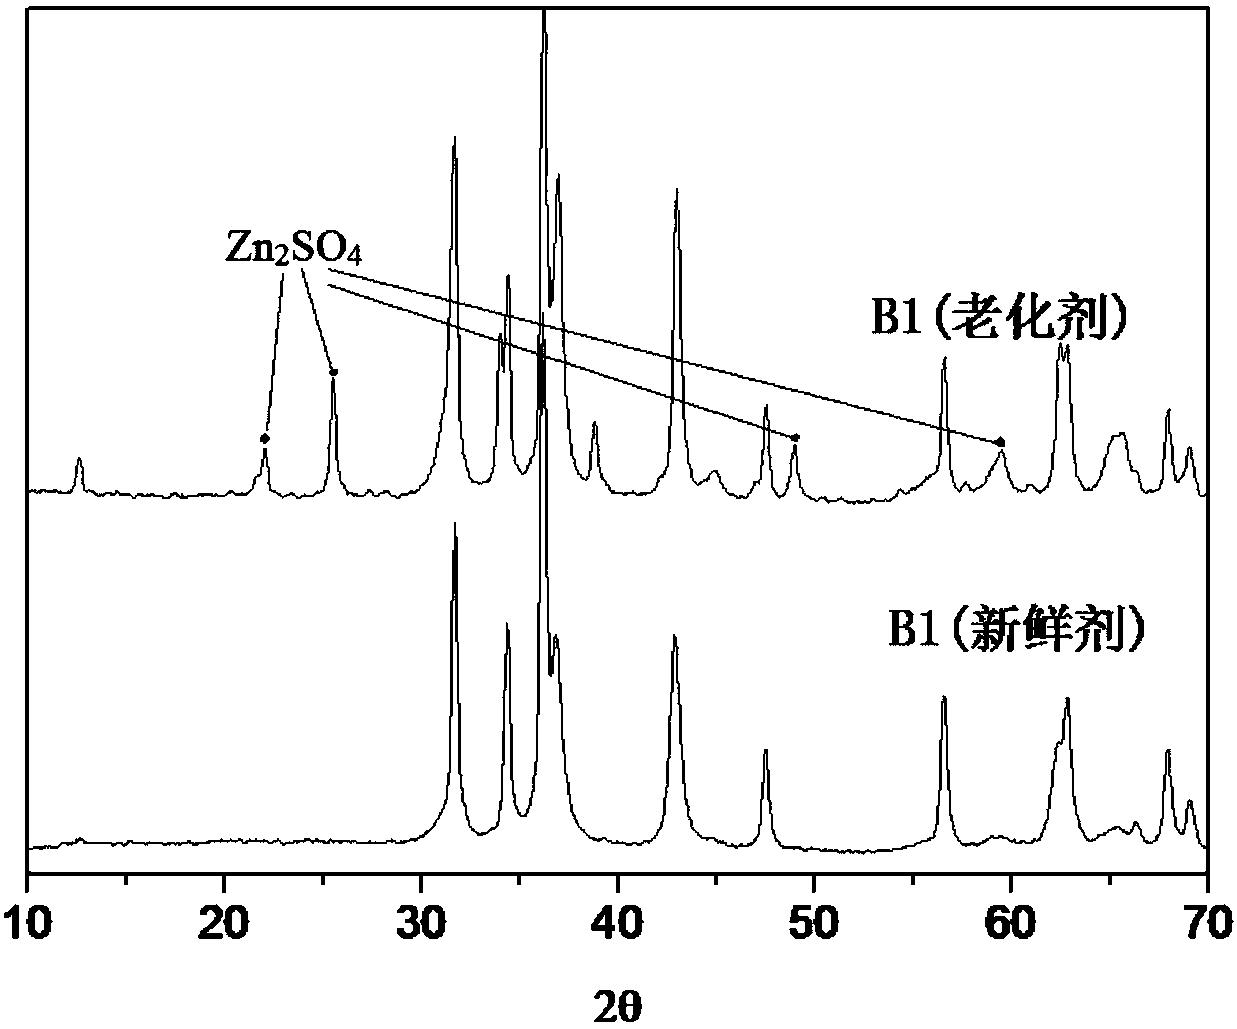 Hydrocarbon oil desulfurization catalyst containing FAU-structure and/or BEA-structure molecular sieve, preparation method of hydrocarbon oil desulfurization catalyst and process for hydrocarbon oil desulfurization